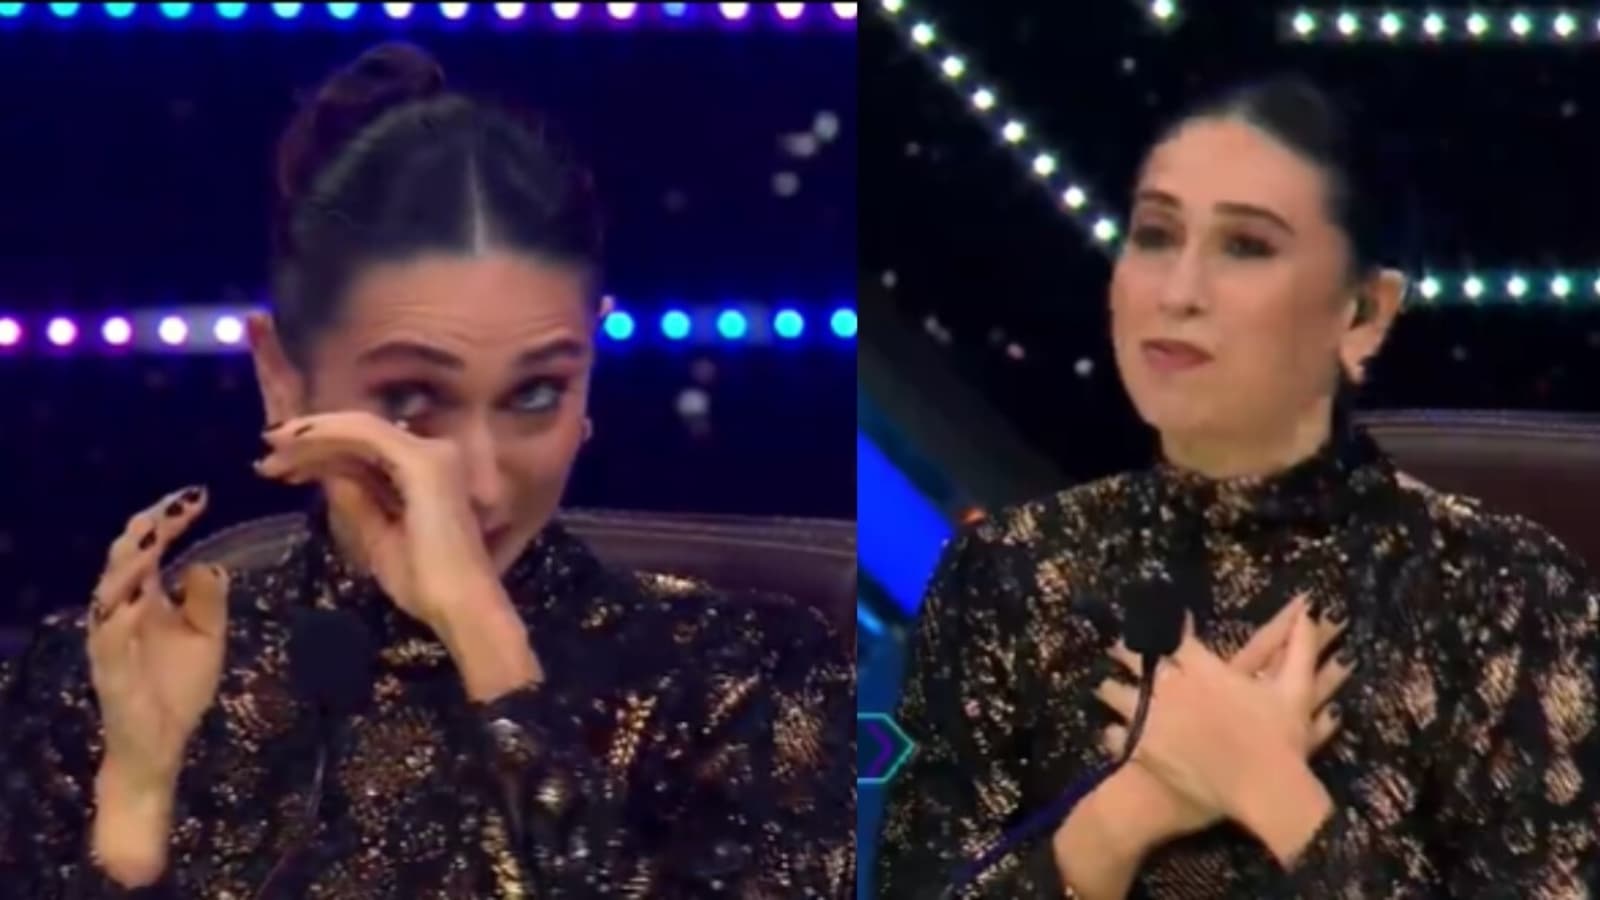 Karishma Kapoor Xx Video Full Hd - Karisma Kapoor, filling in for Shilpa Shetty, cries on Super Dancer 4 sets.  Here's why - Hindustan Times